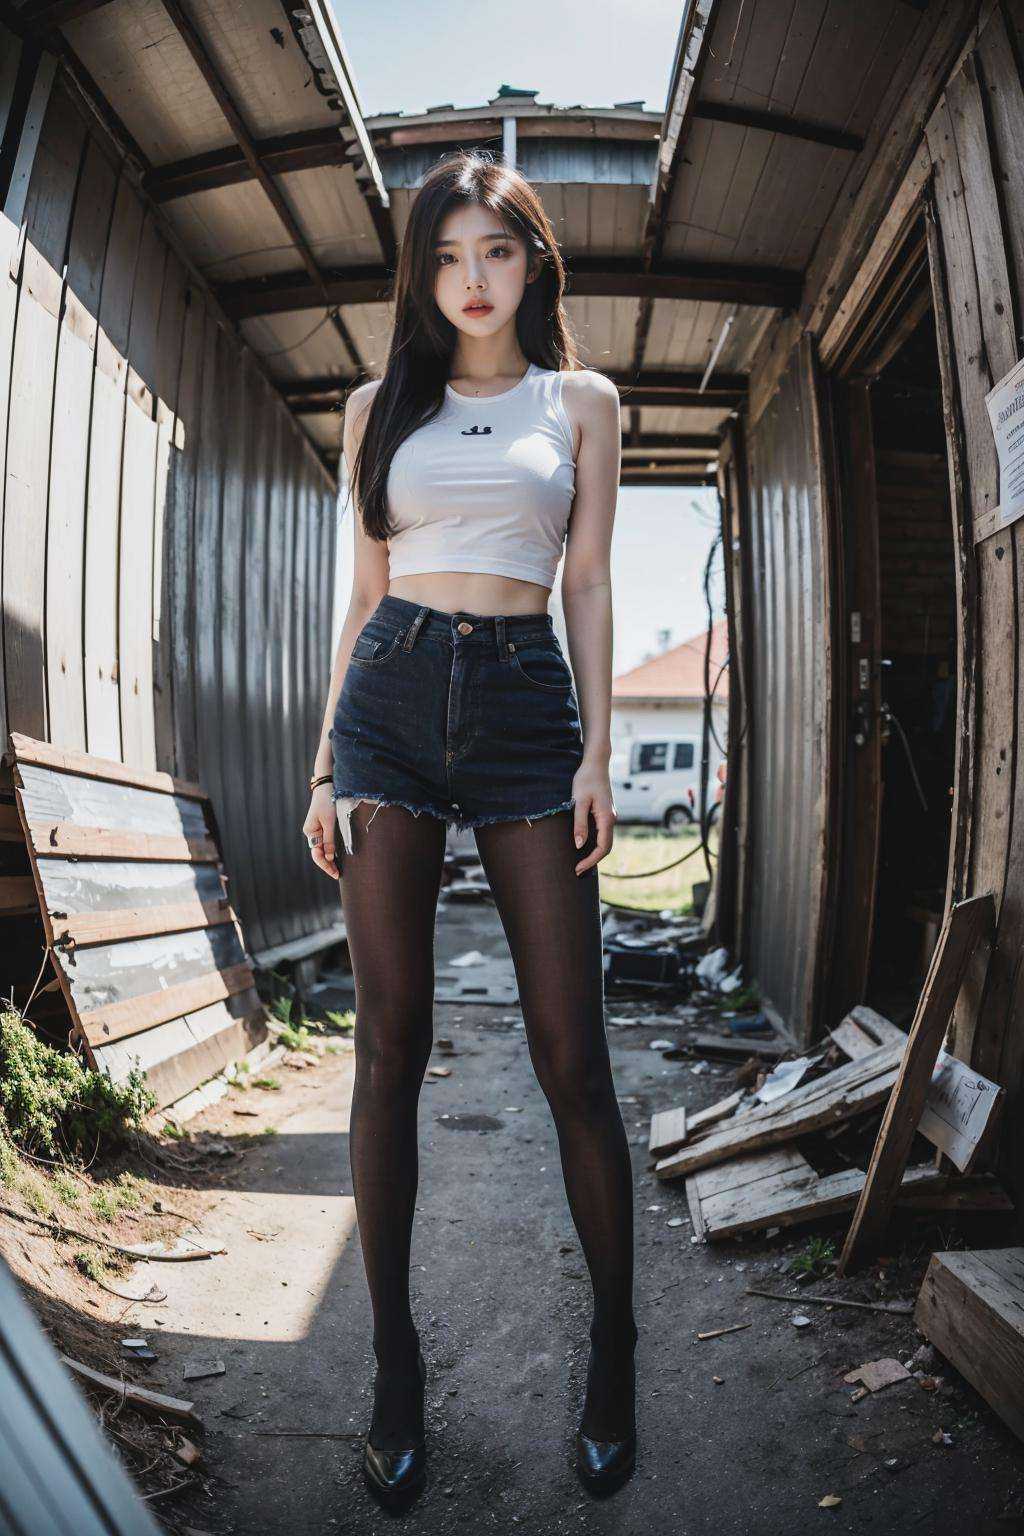 postapocalypse, photo of a kpop idol (women:1.3) standing by a wrecked old van, pantyhose, revealing clothes,natural lighting, 8k uhd, high quality, film grain, Fujifilm XT3